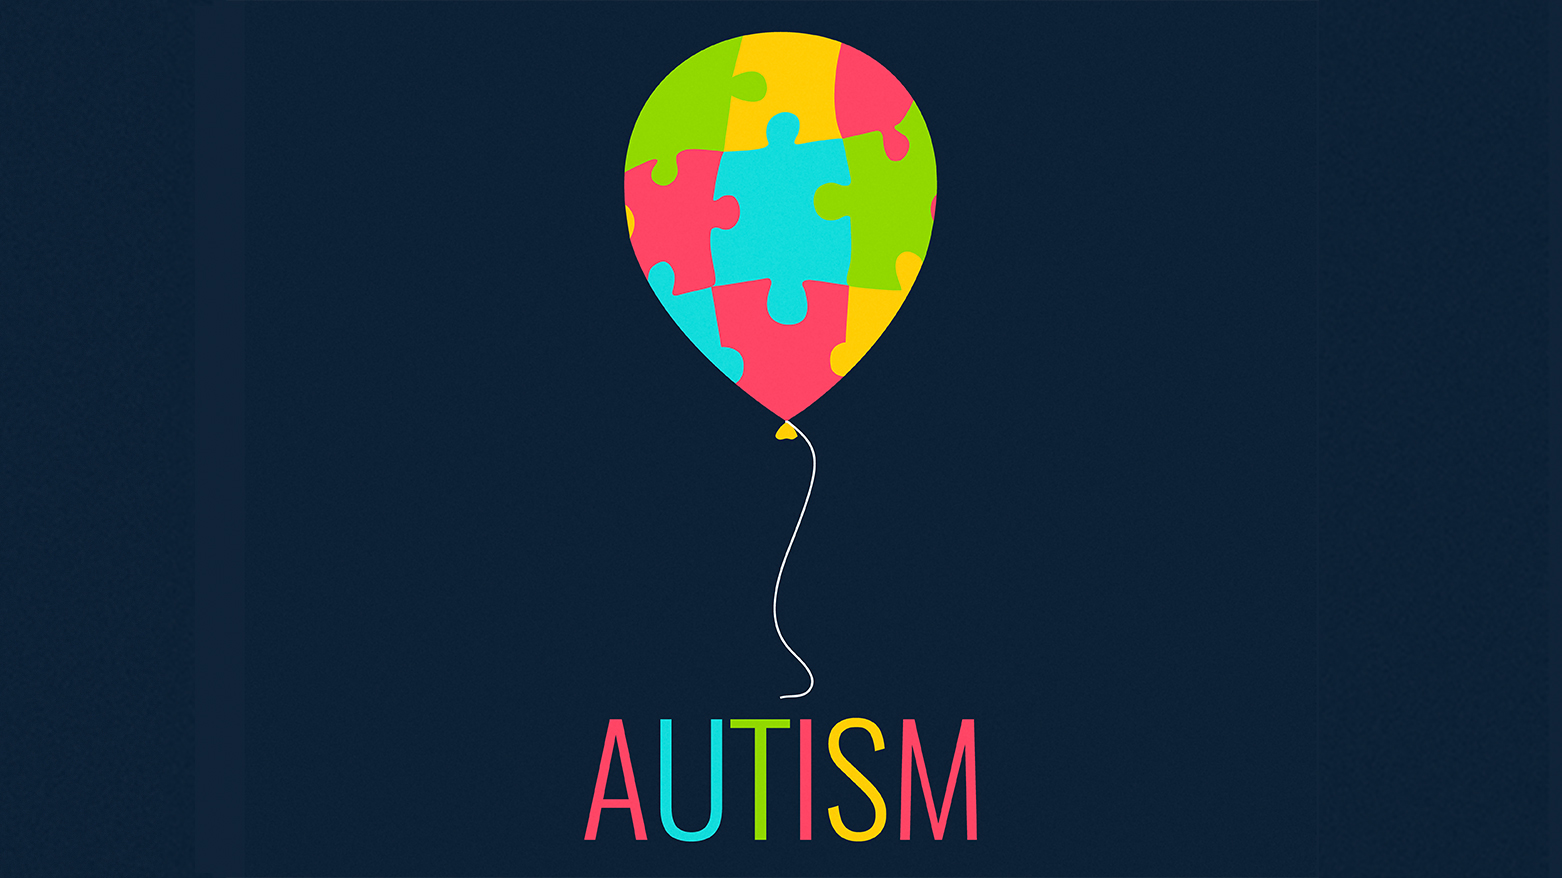 KRG initiatives boost support for autism awareness and care